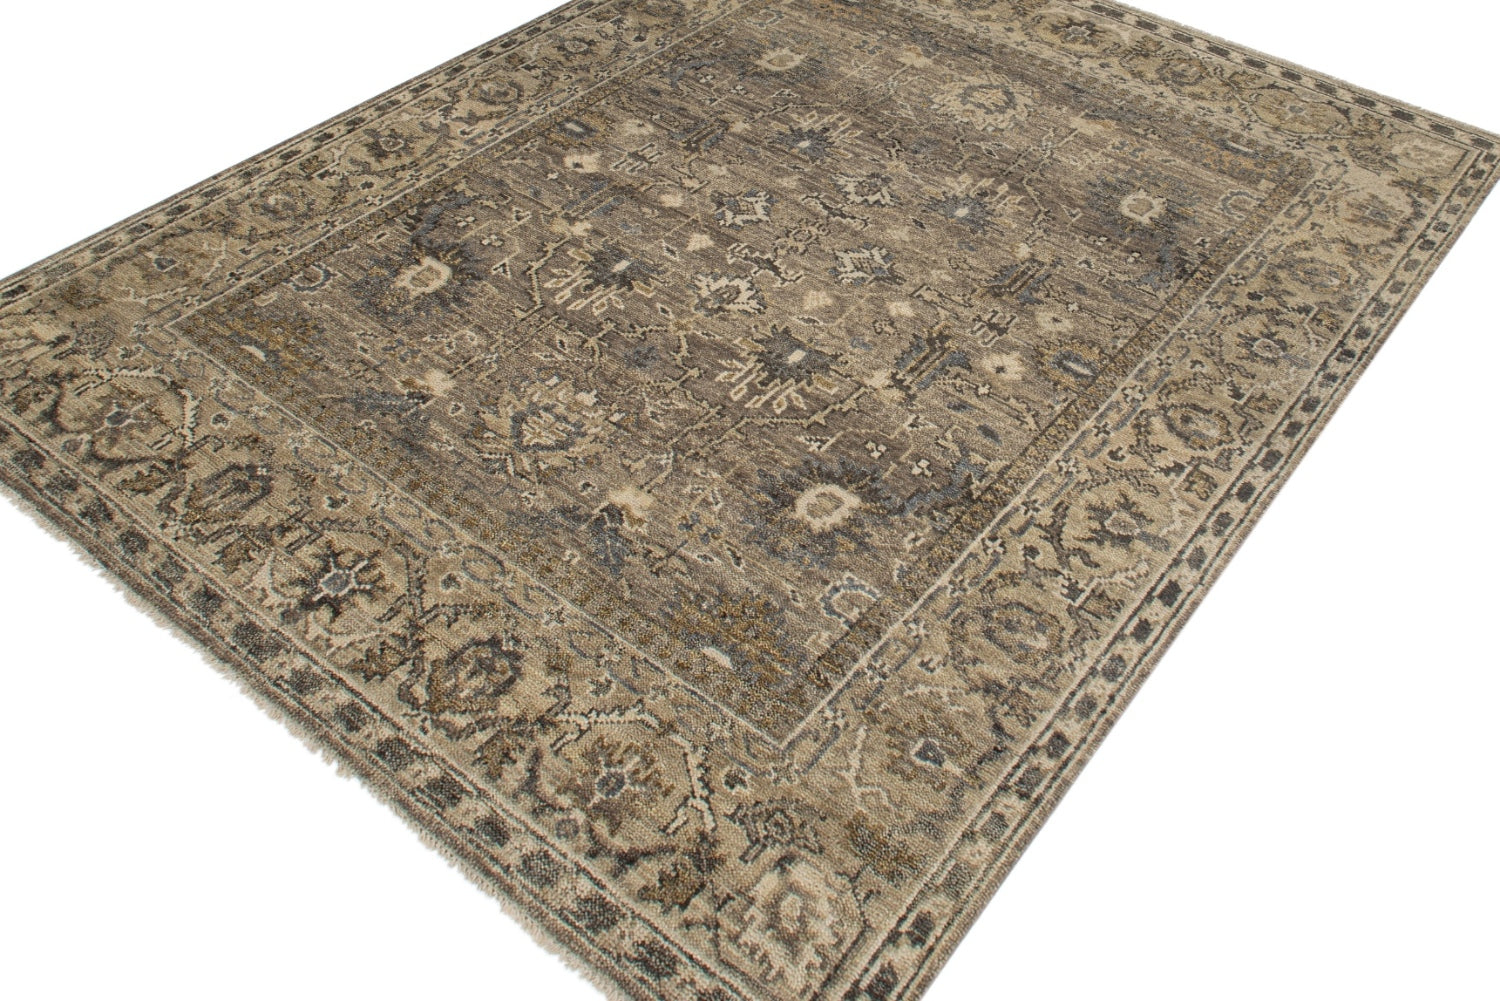 Sultanabad 6 Handwoven Traditional Rug, J71711